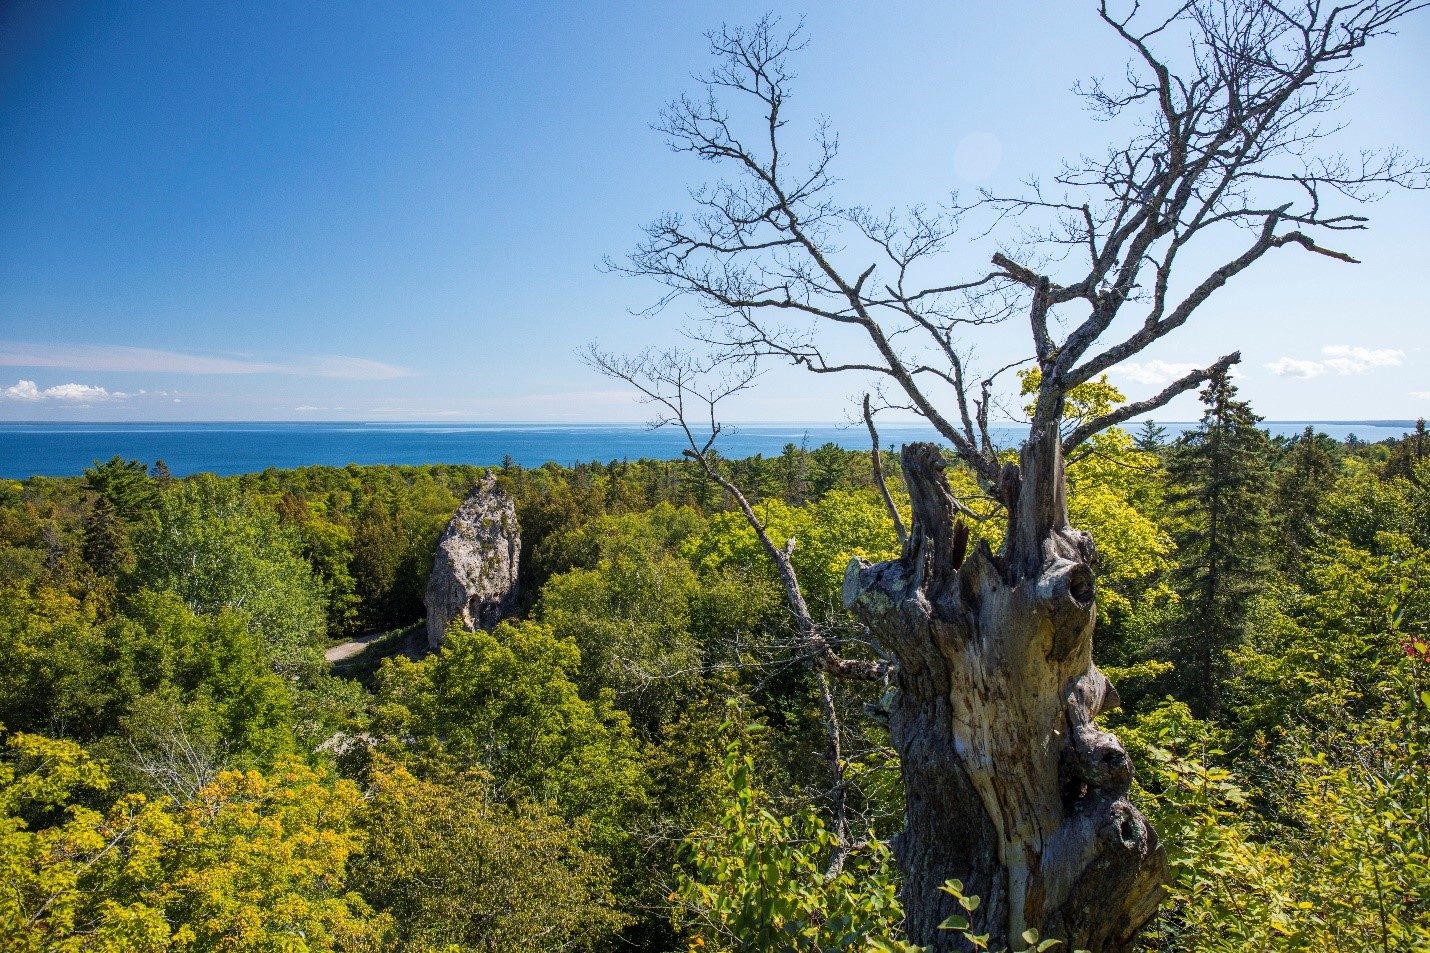 Mackinac Island’s towering Sugar Loaf rock stands against a blue backdrop of water with green forest in the foreground.